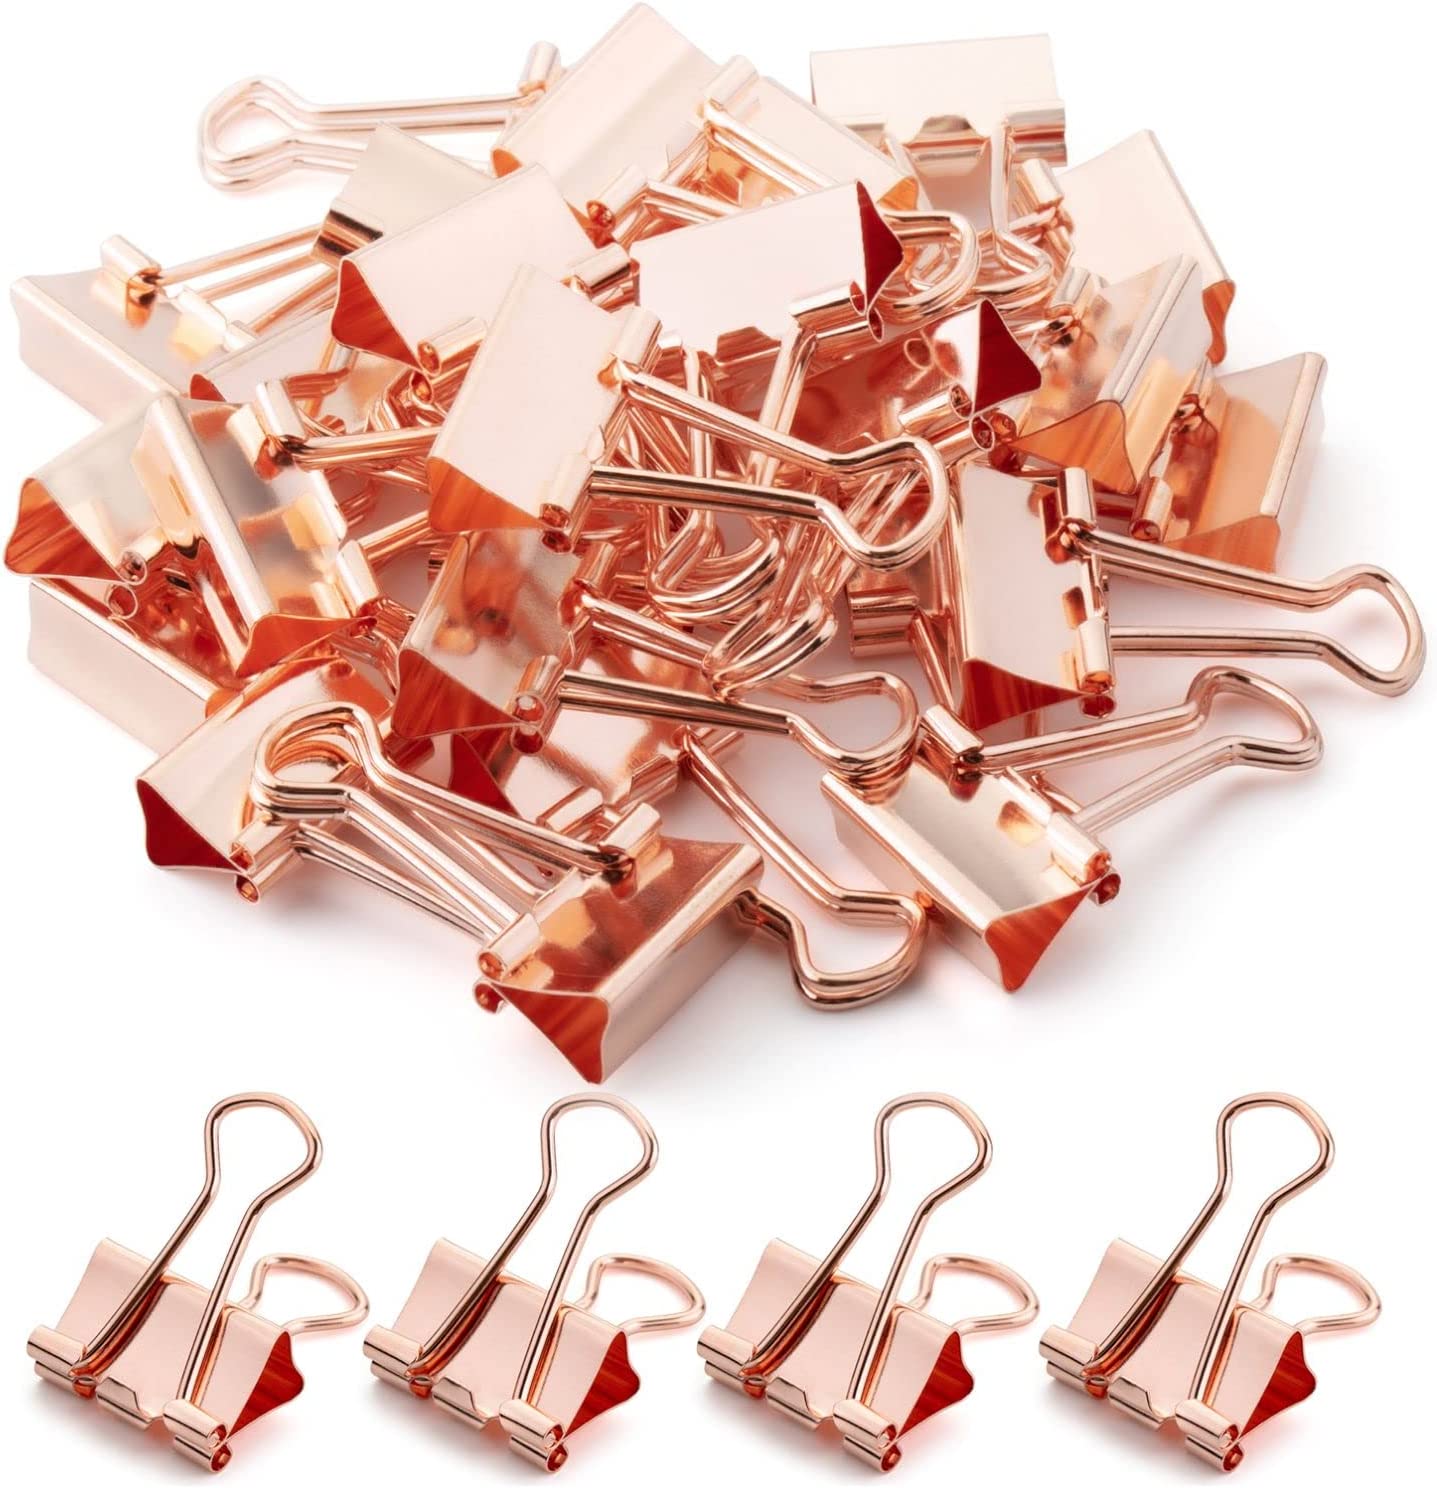 Binder Clips, Small Binder Clips, 50 Pack, 0.75 in, Rose Gold, Small Clips,  Paper Binder Clips - Mr. Pen Store